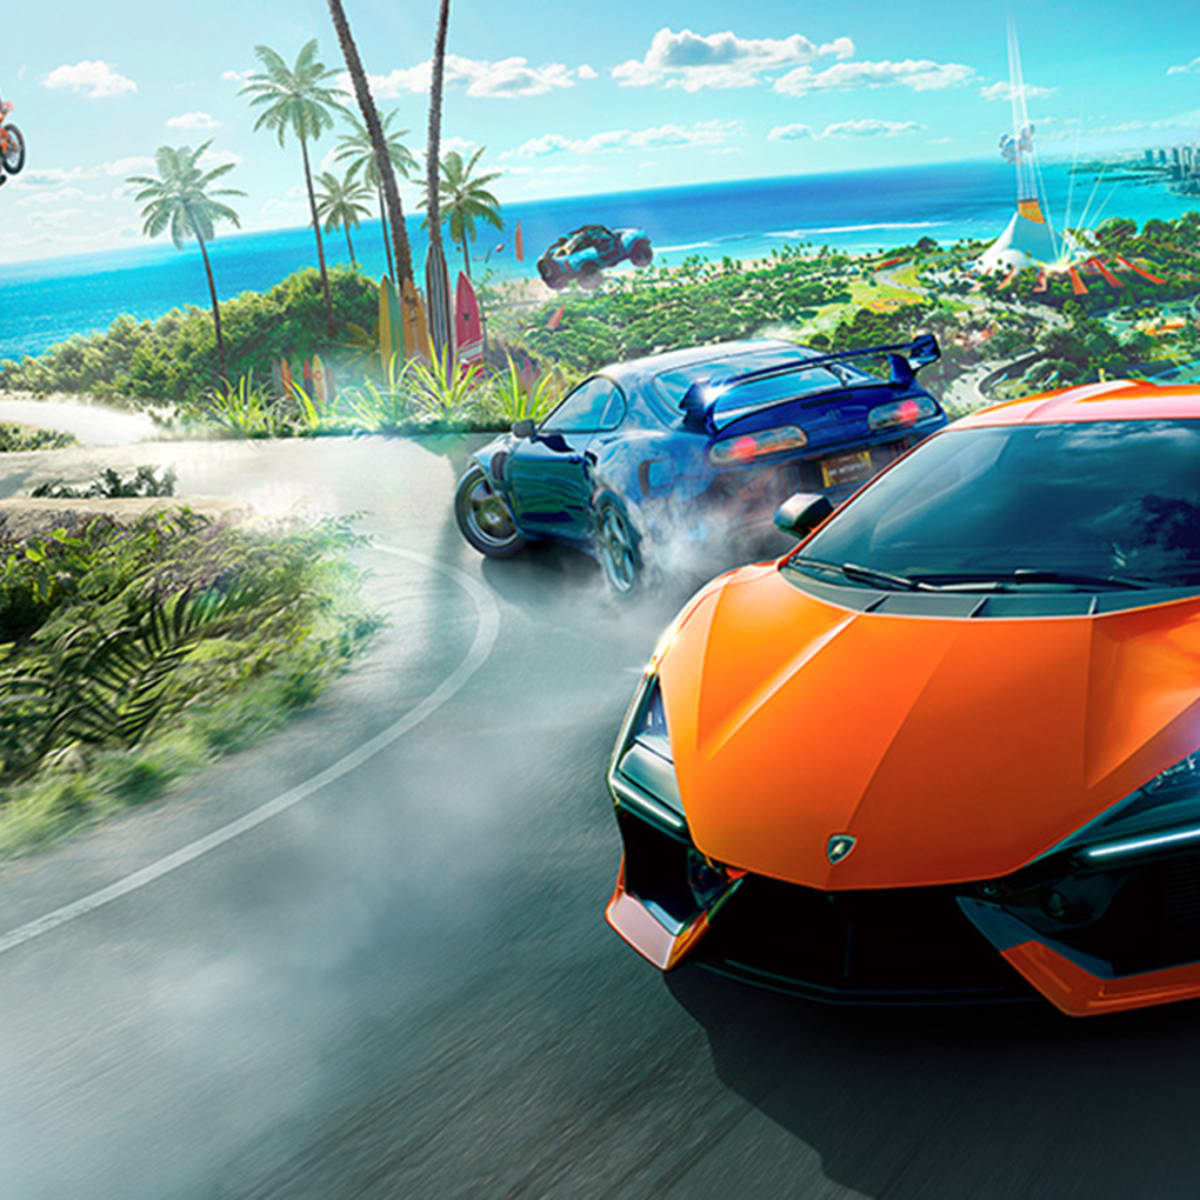 The Crew Motorfest Has Had The Franchise's Most Successful Launch